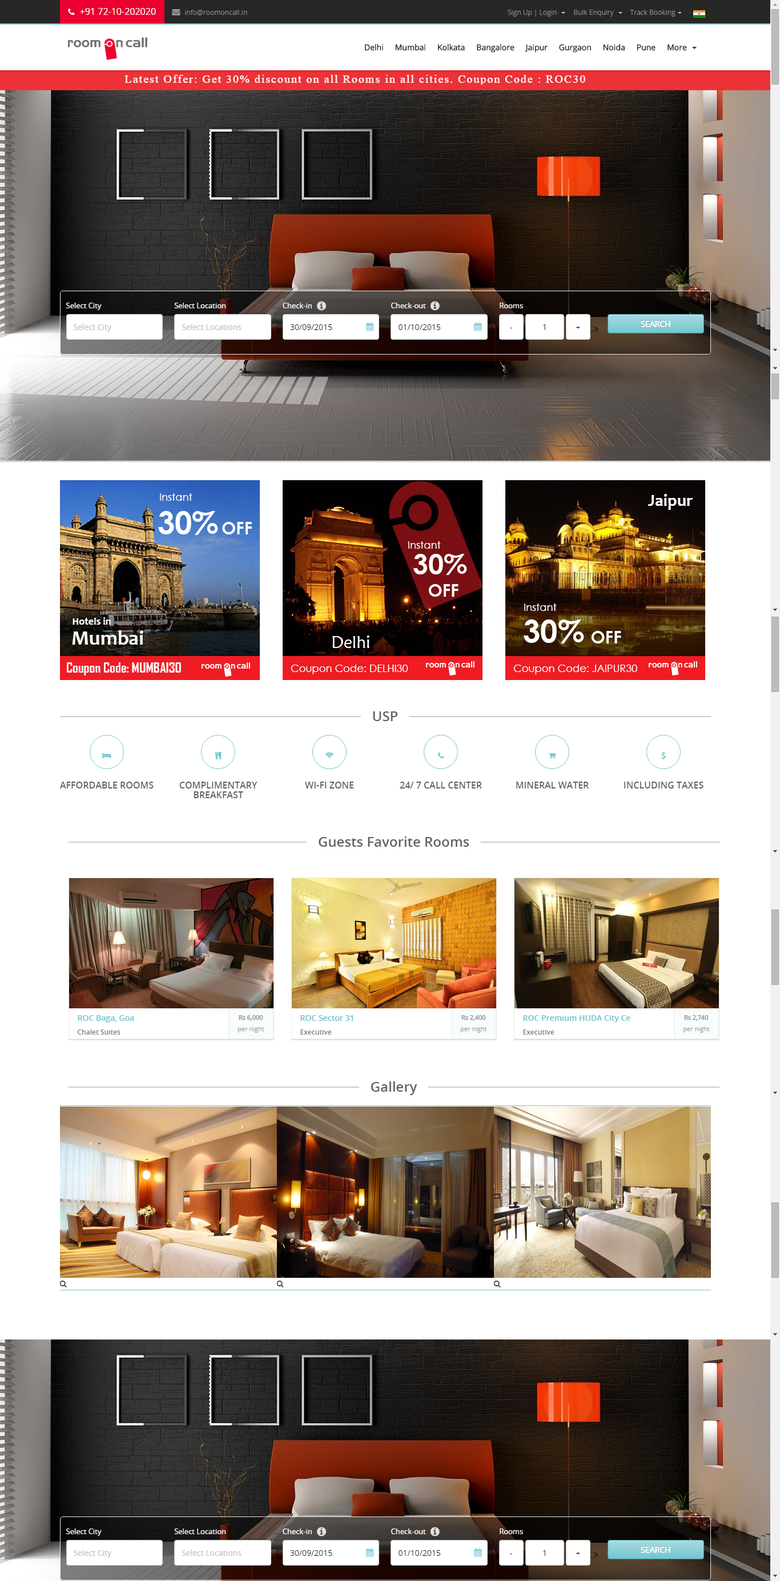 Room On Call Online Hotel Room Booking Portal